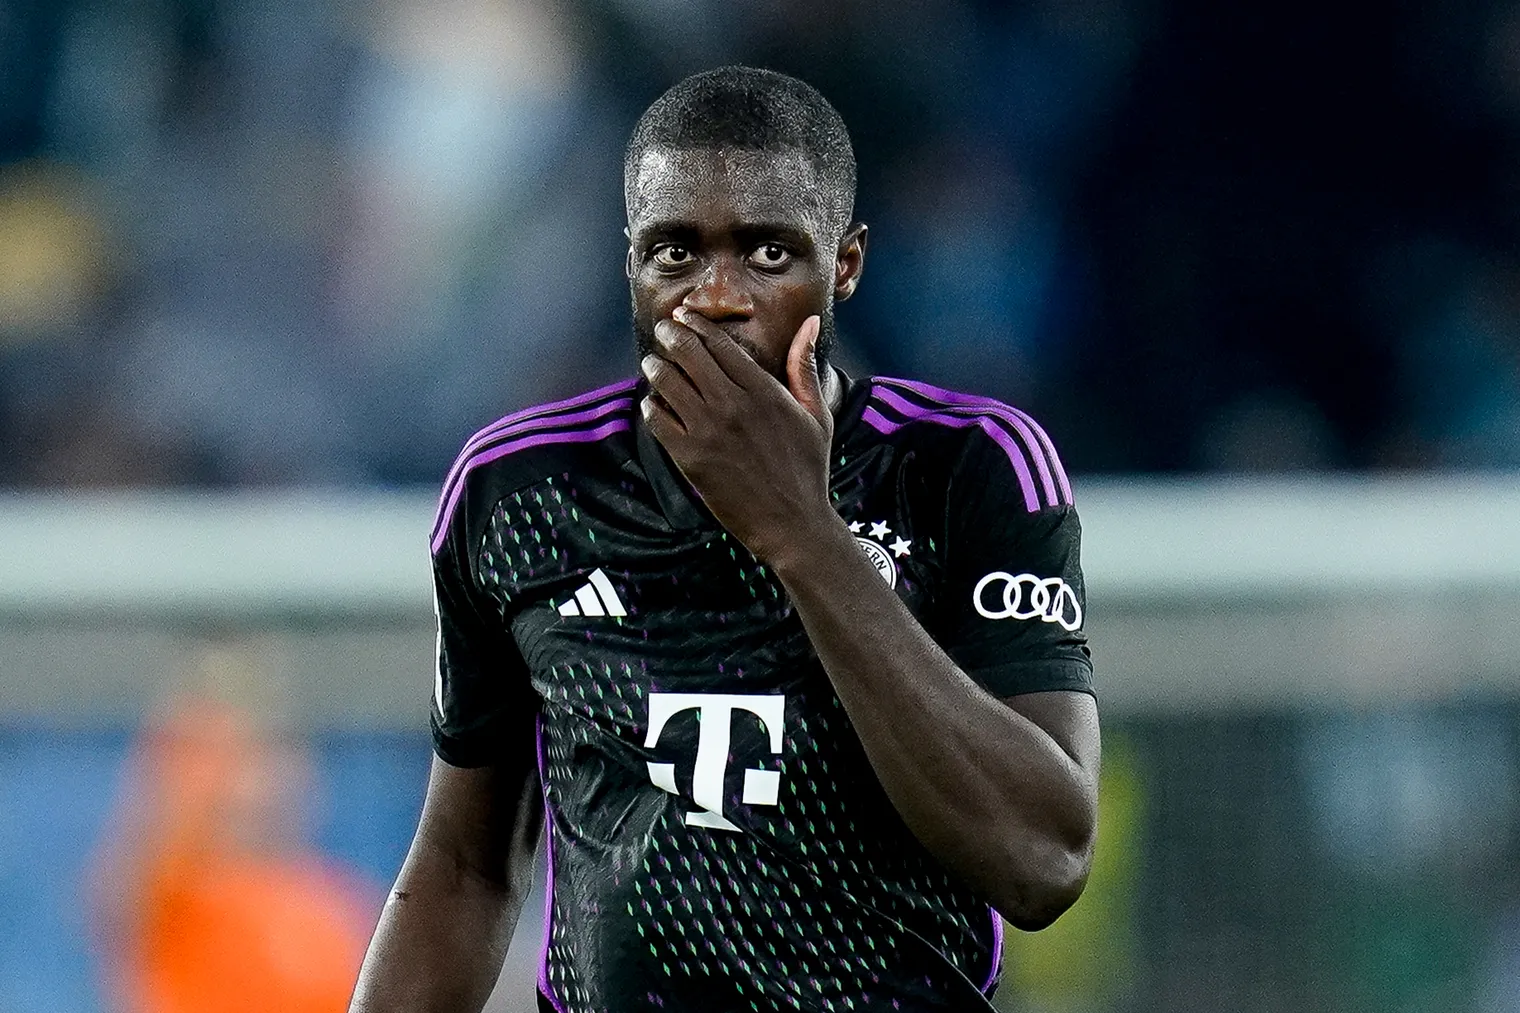 Bayern Munich denounce racist abuse directed at Dayot Upamecano after defeat to Lazio